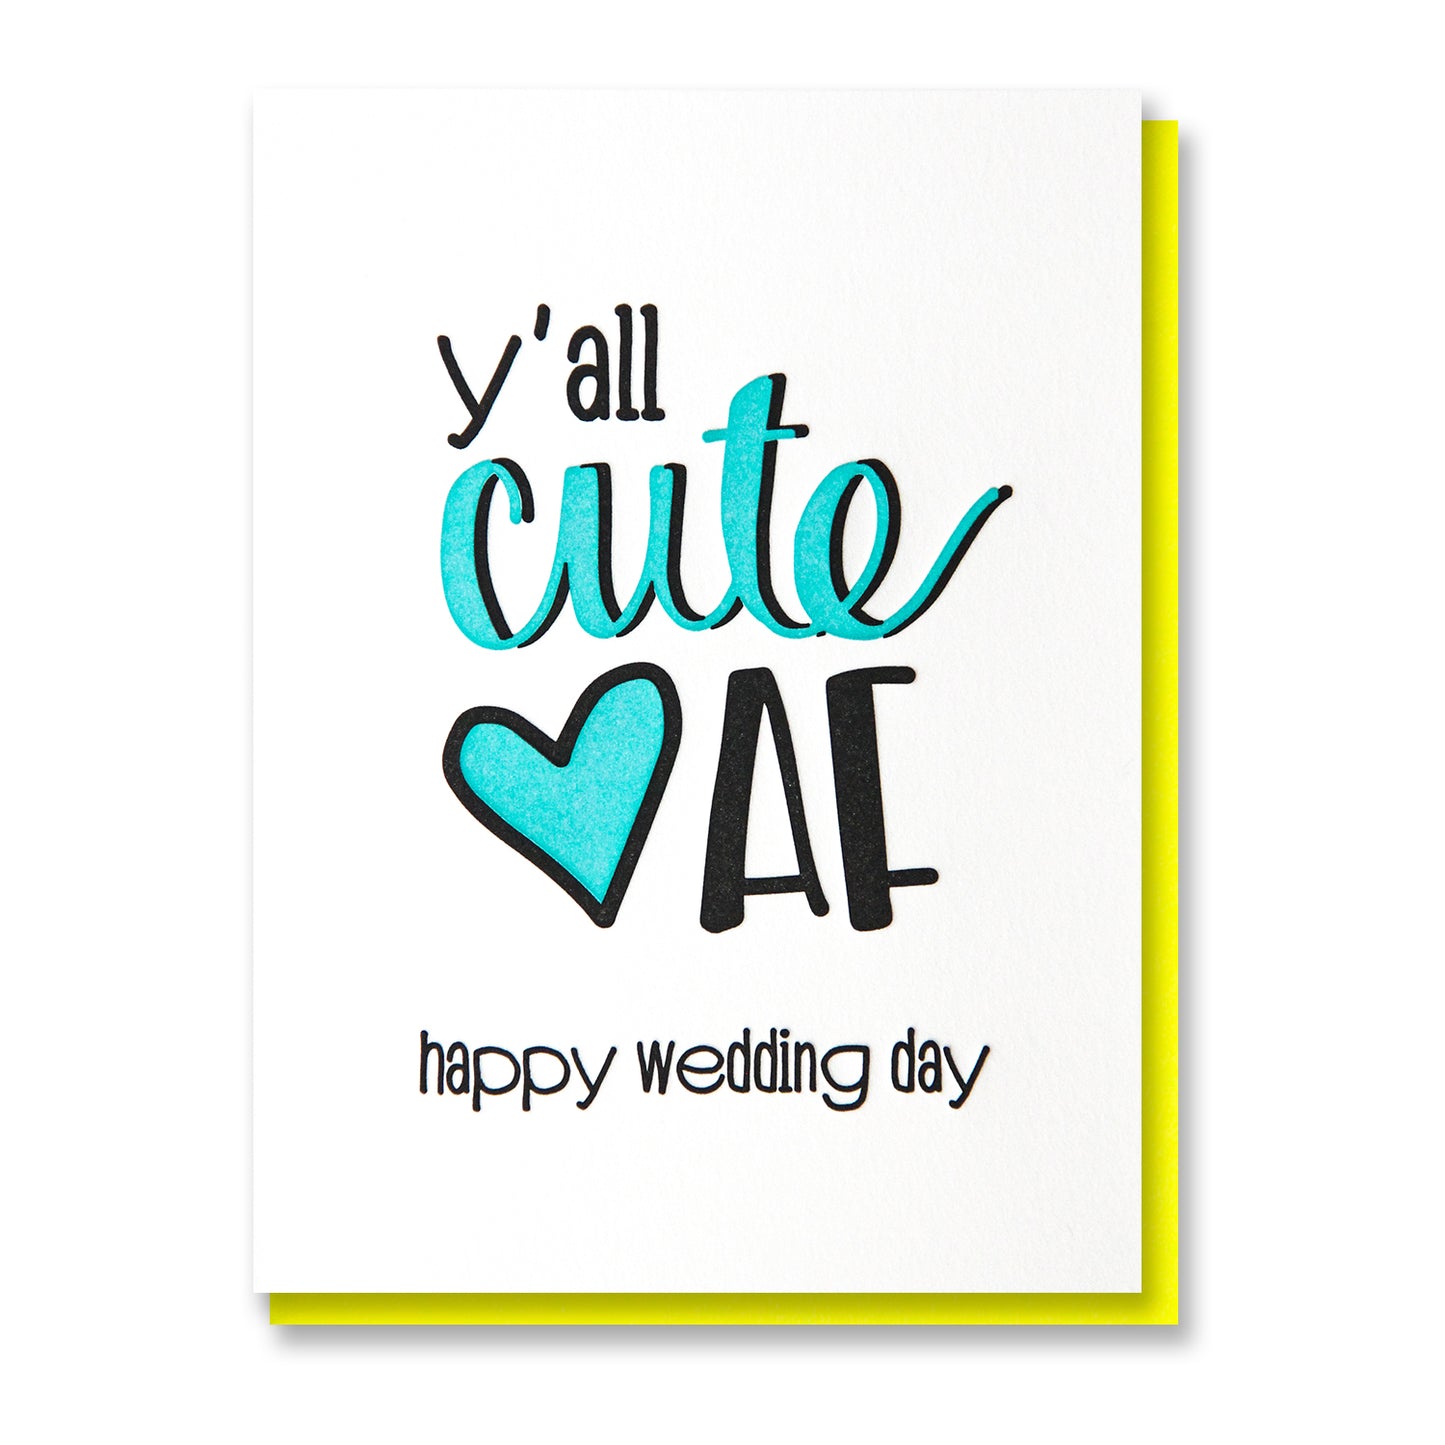 Y'all Cute AF Letterpress Card | Happy Wedding Day | kiss and punch - Kiss and Punch